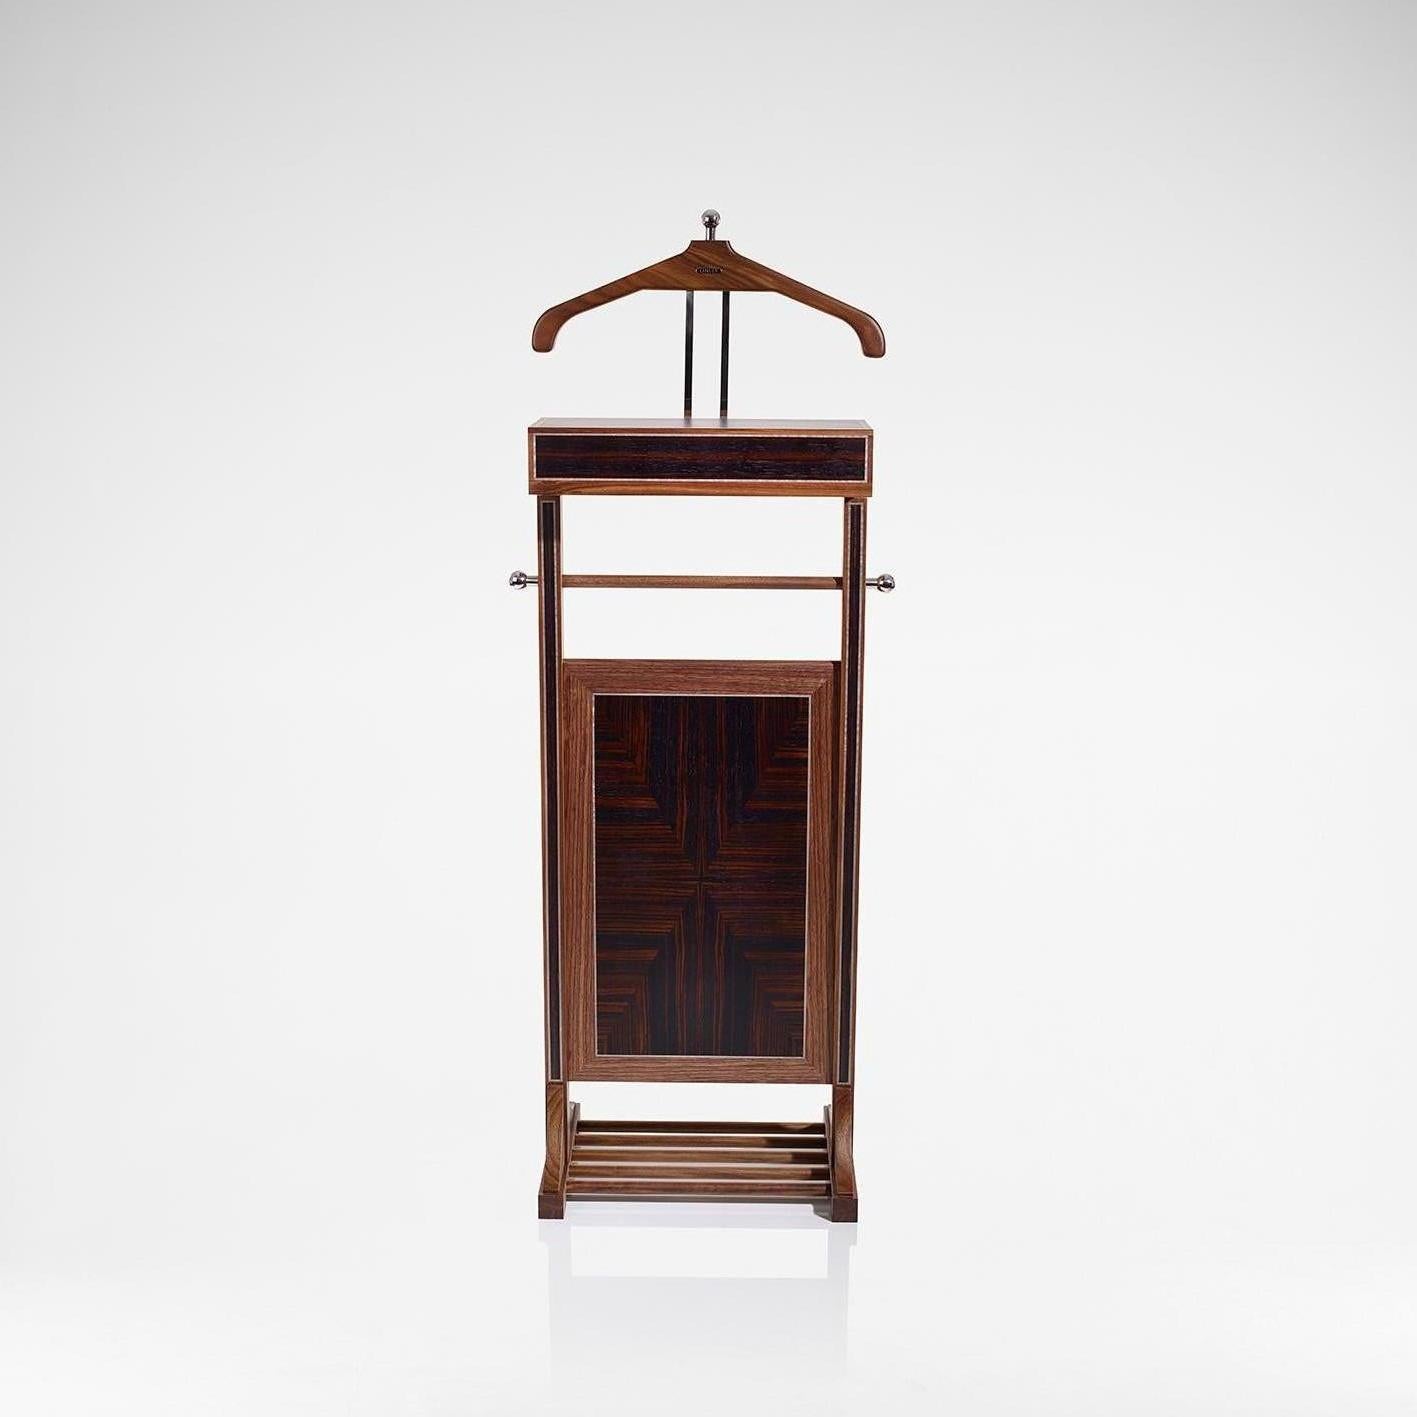 The Linley valet stand is a wonderfully practical piece of furniture that is used for hanging a suit and hat and holding small accessories. Handcrafted in walnut and Macassar with grey sycamore stringing and stainless steel detailing, the valet